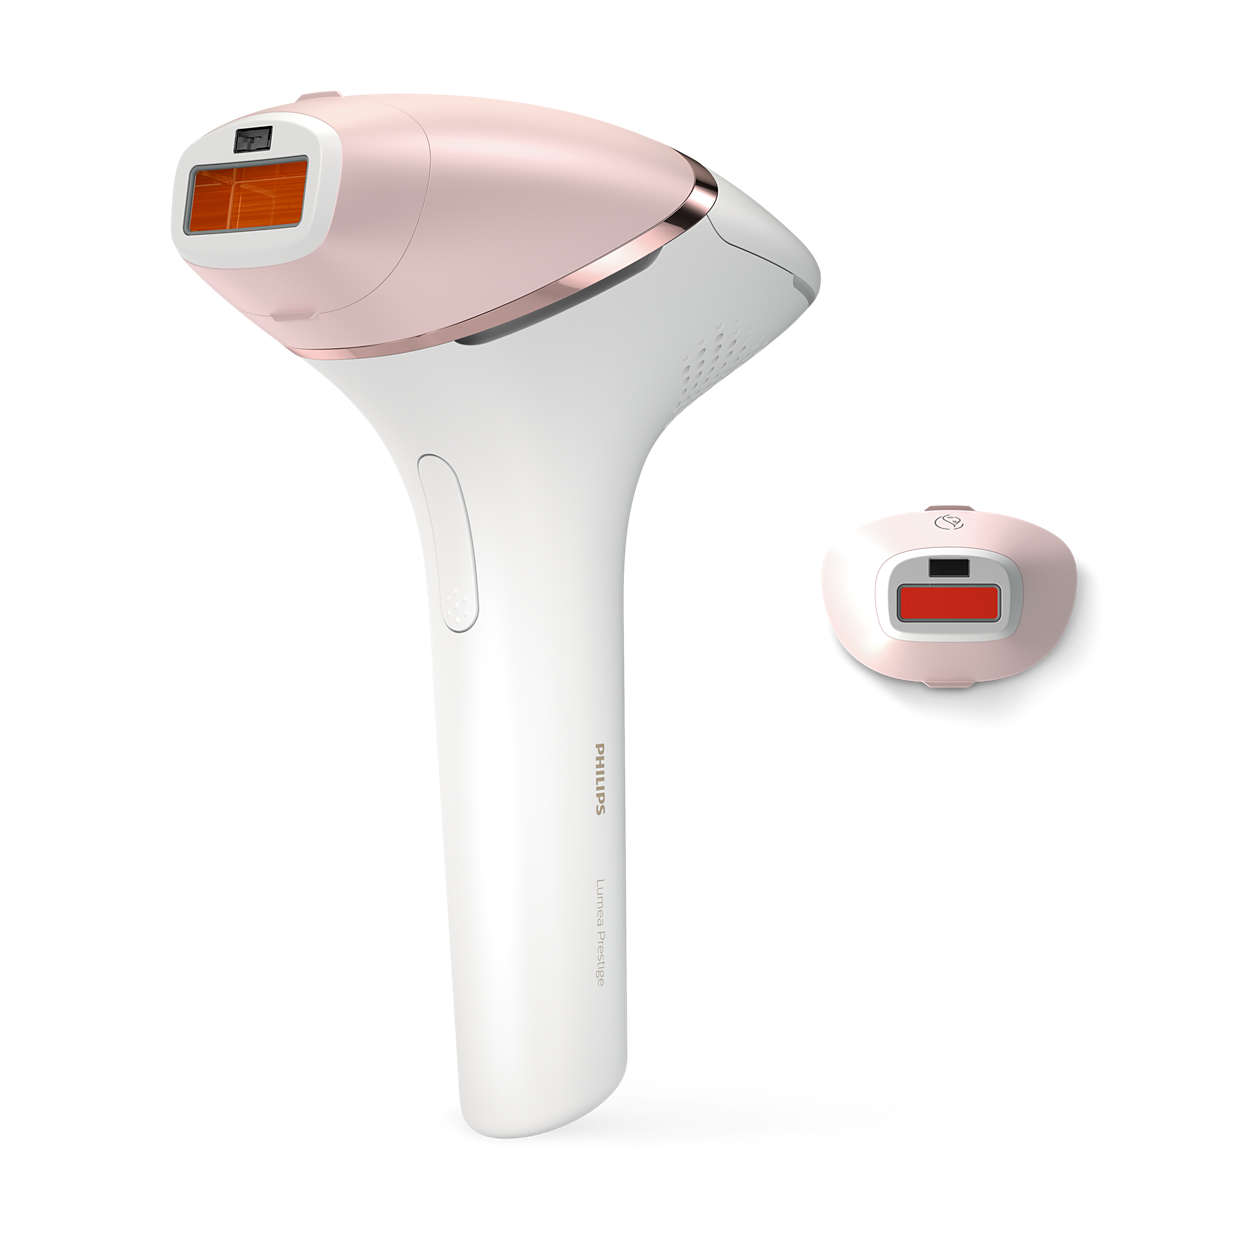 Philips Beauty insider reveals the latest trends in the electrical beauty market